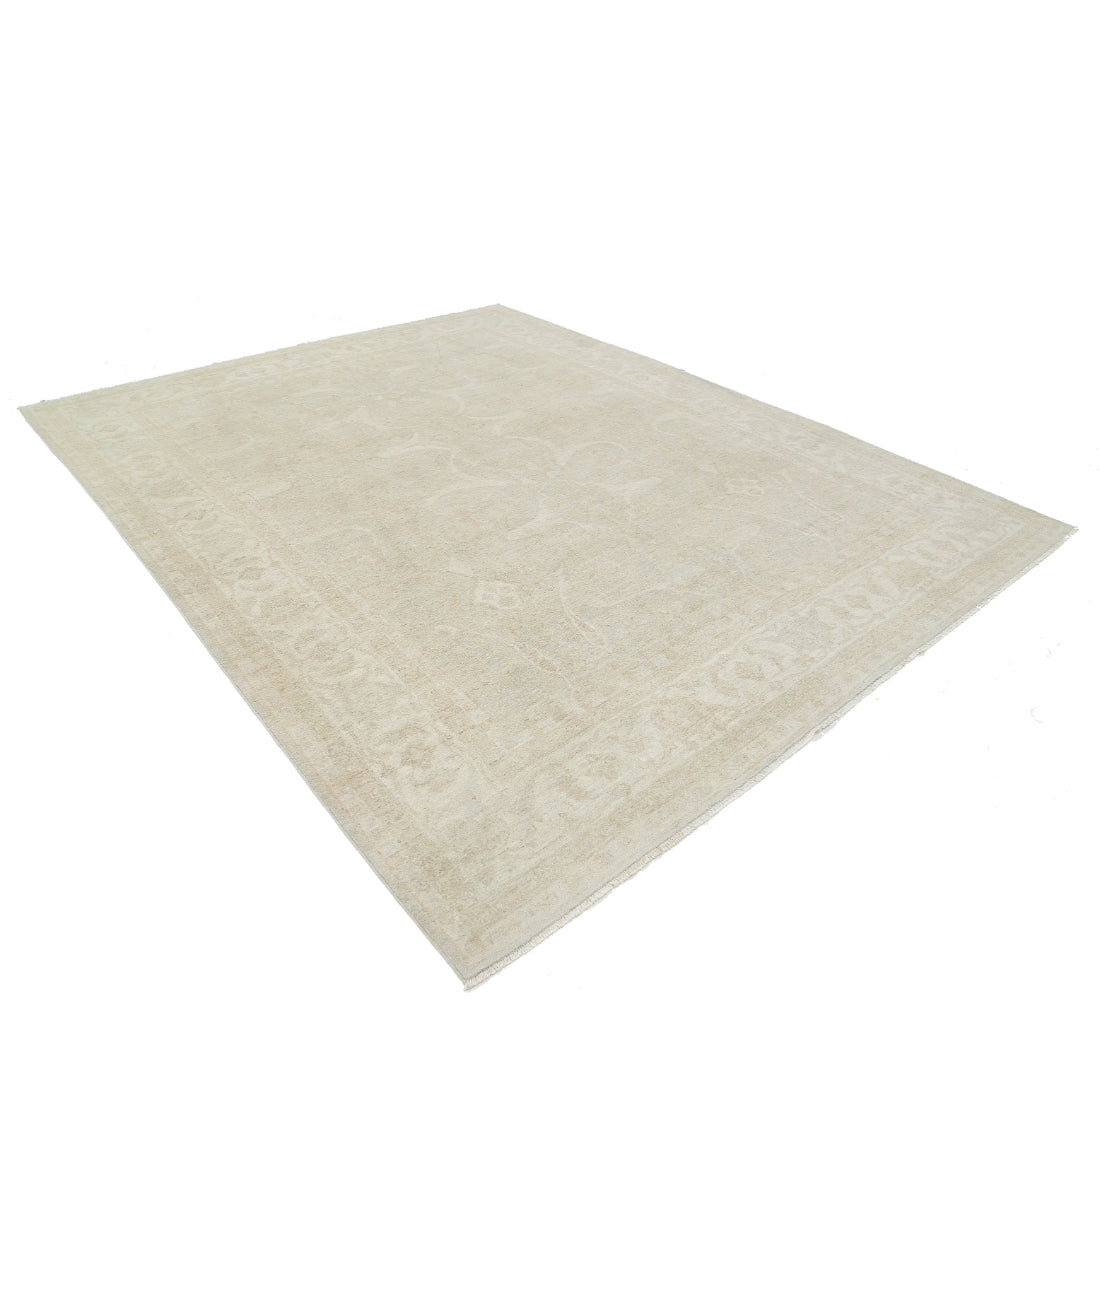 Hand Knotted Serenity Wool Rug - 8'11'' x 11'2'' 8'11'' x 11'2'' (268 X 335) / Grey / Ivory